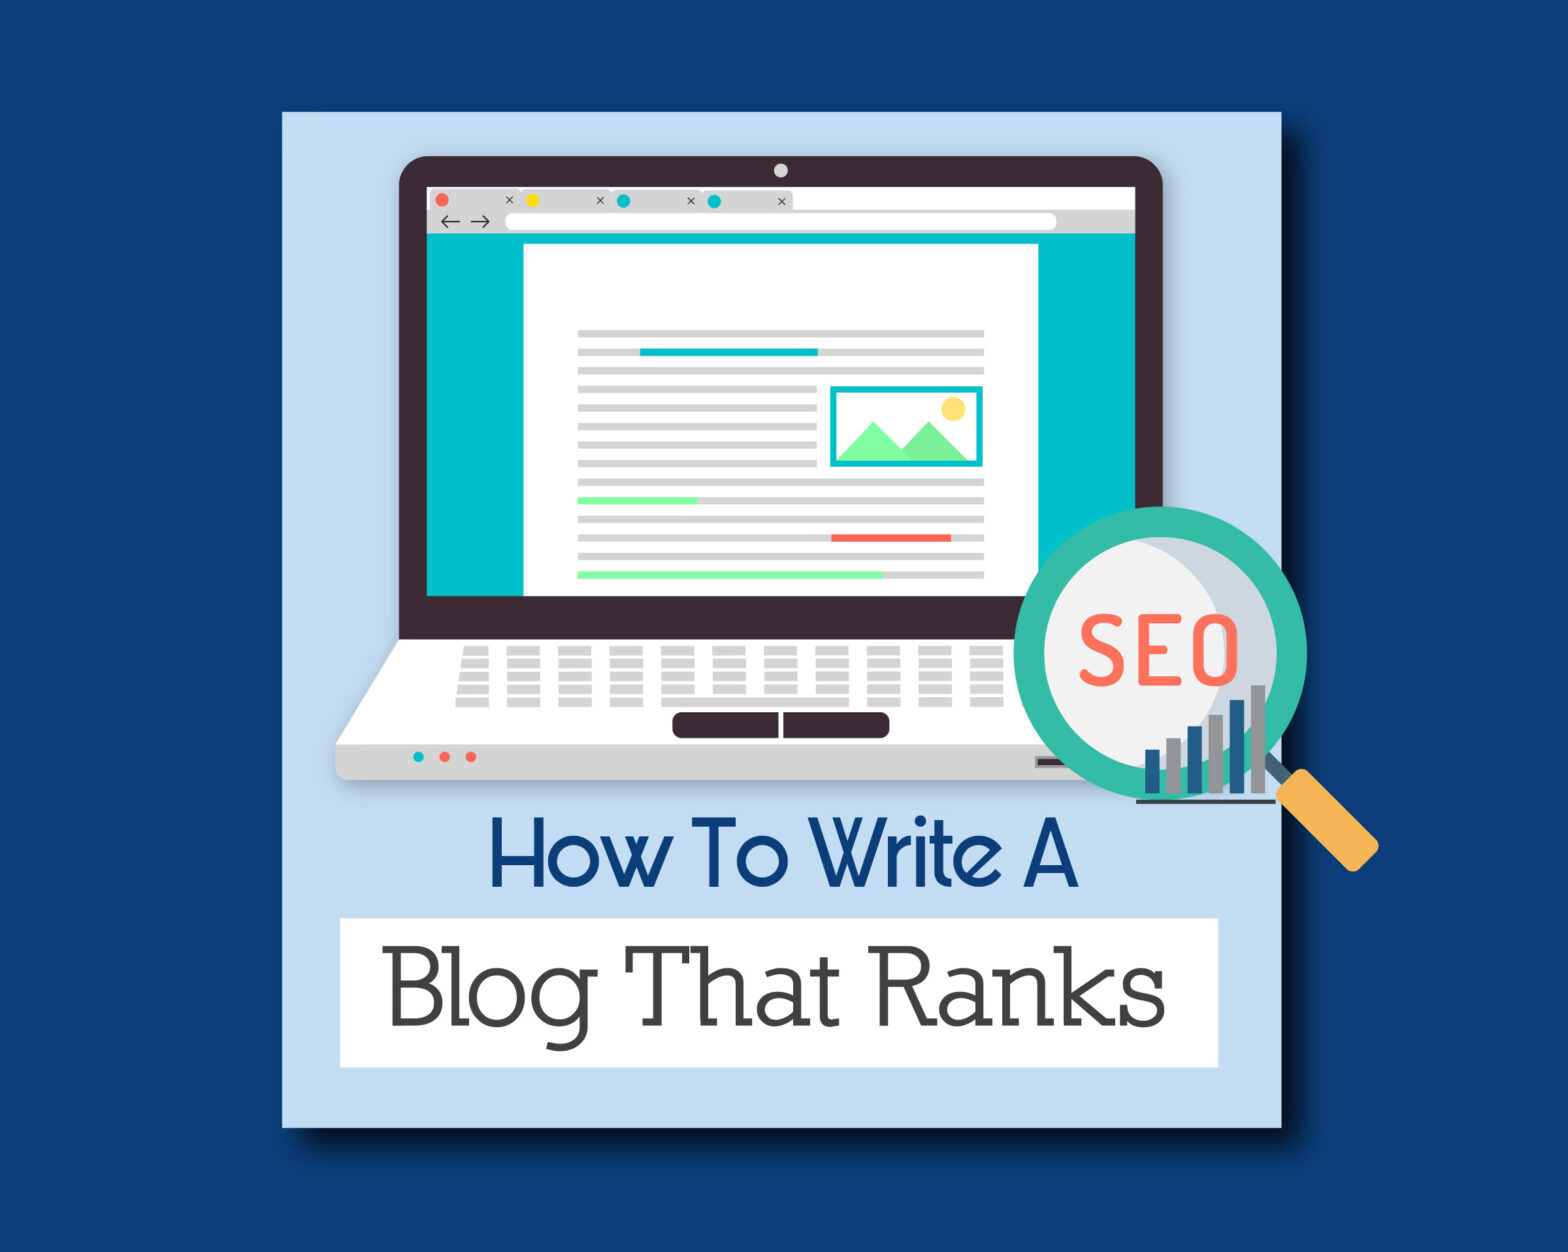 How To Write A Blog That Ranks